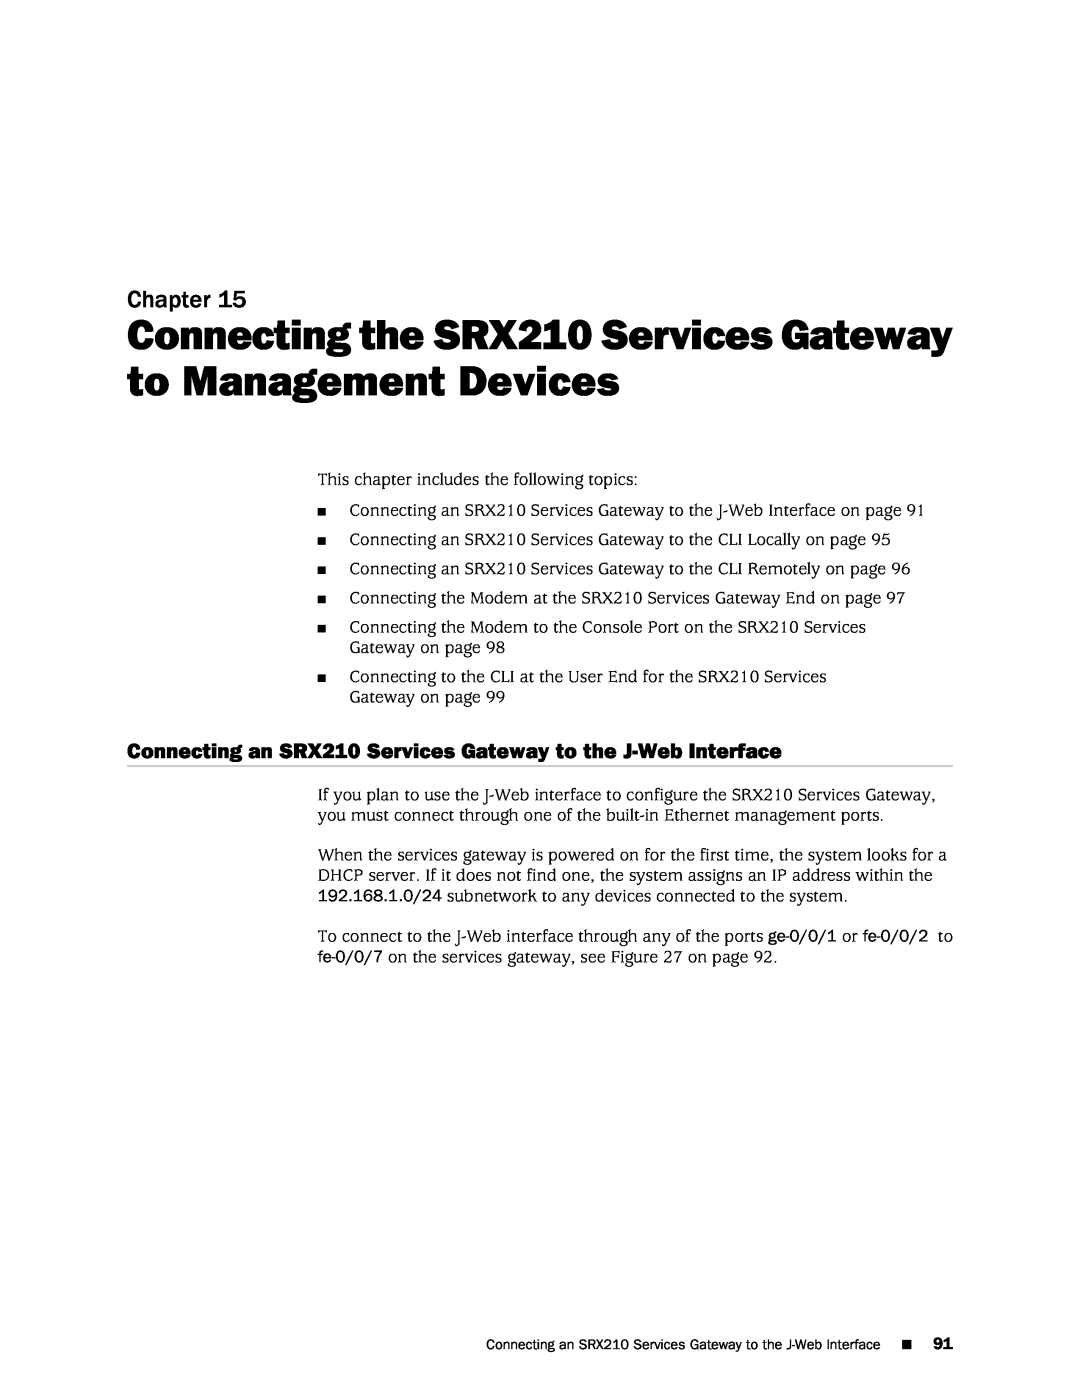 Juniper Networks SRX 210 manual Connecting the SRX210 Services Gateway to Management Devices, Chapter 